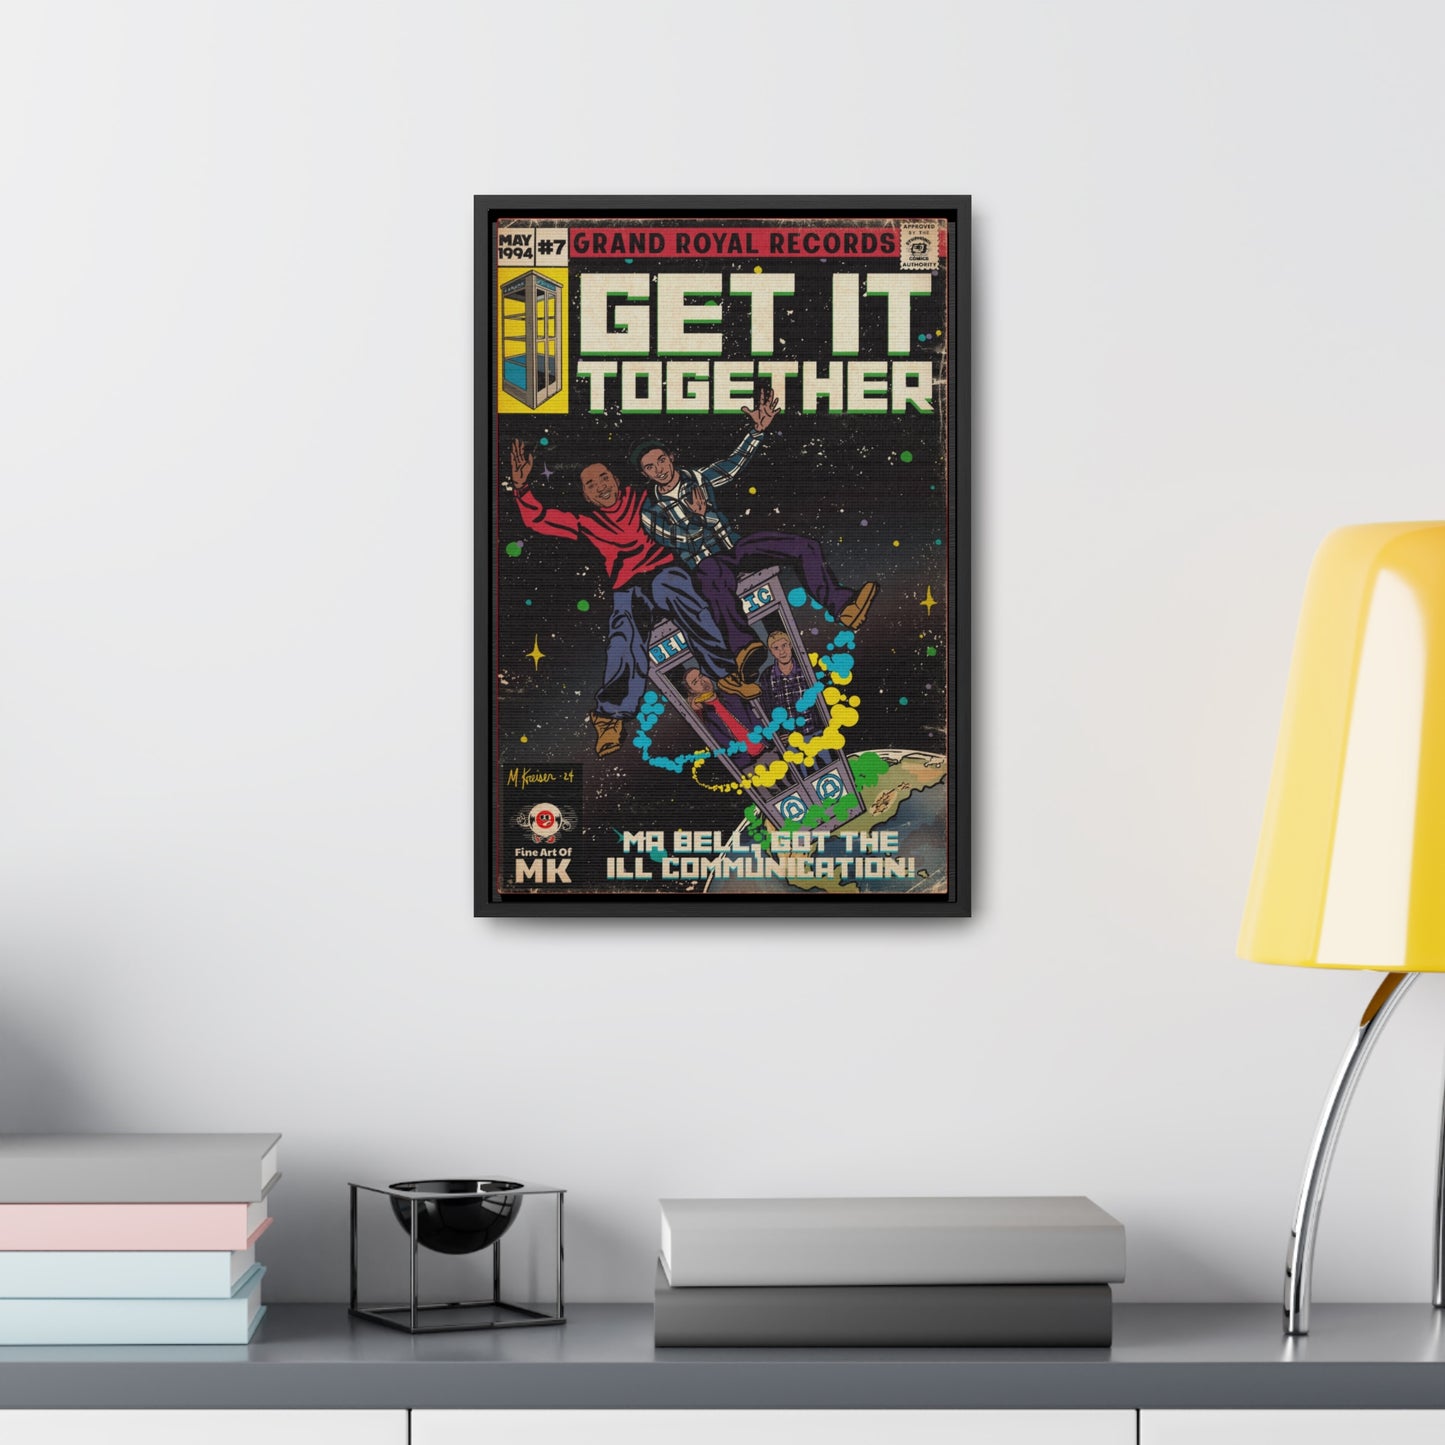 Beastie Boys & Q-Tip - Get it Together - Gallery Canvas Wraps, Vertical Frame